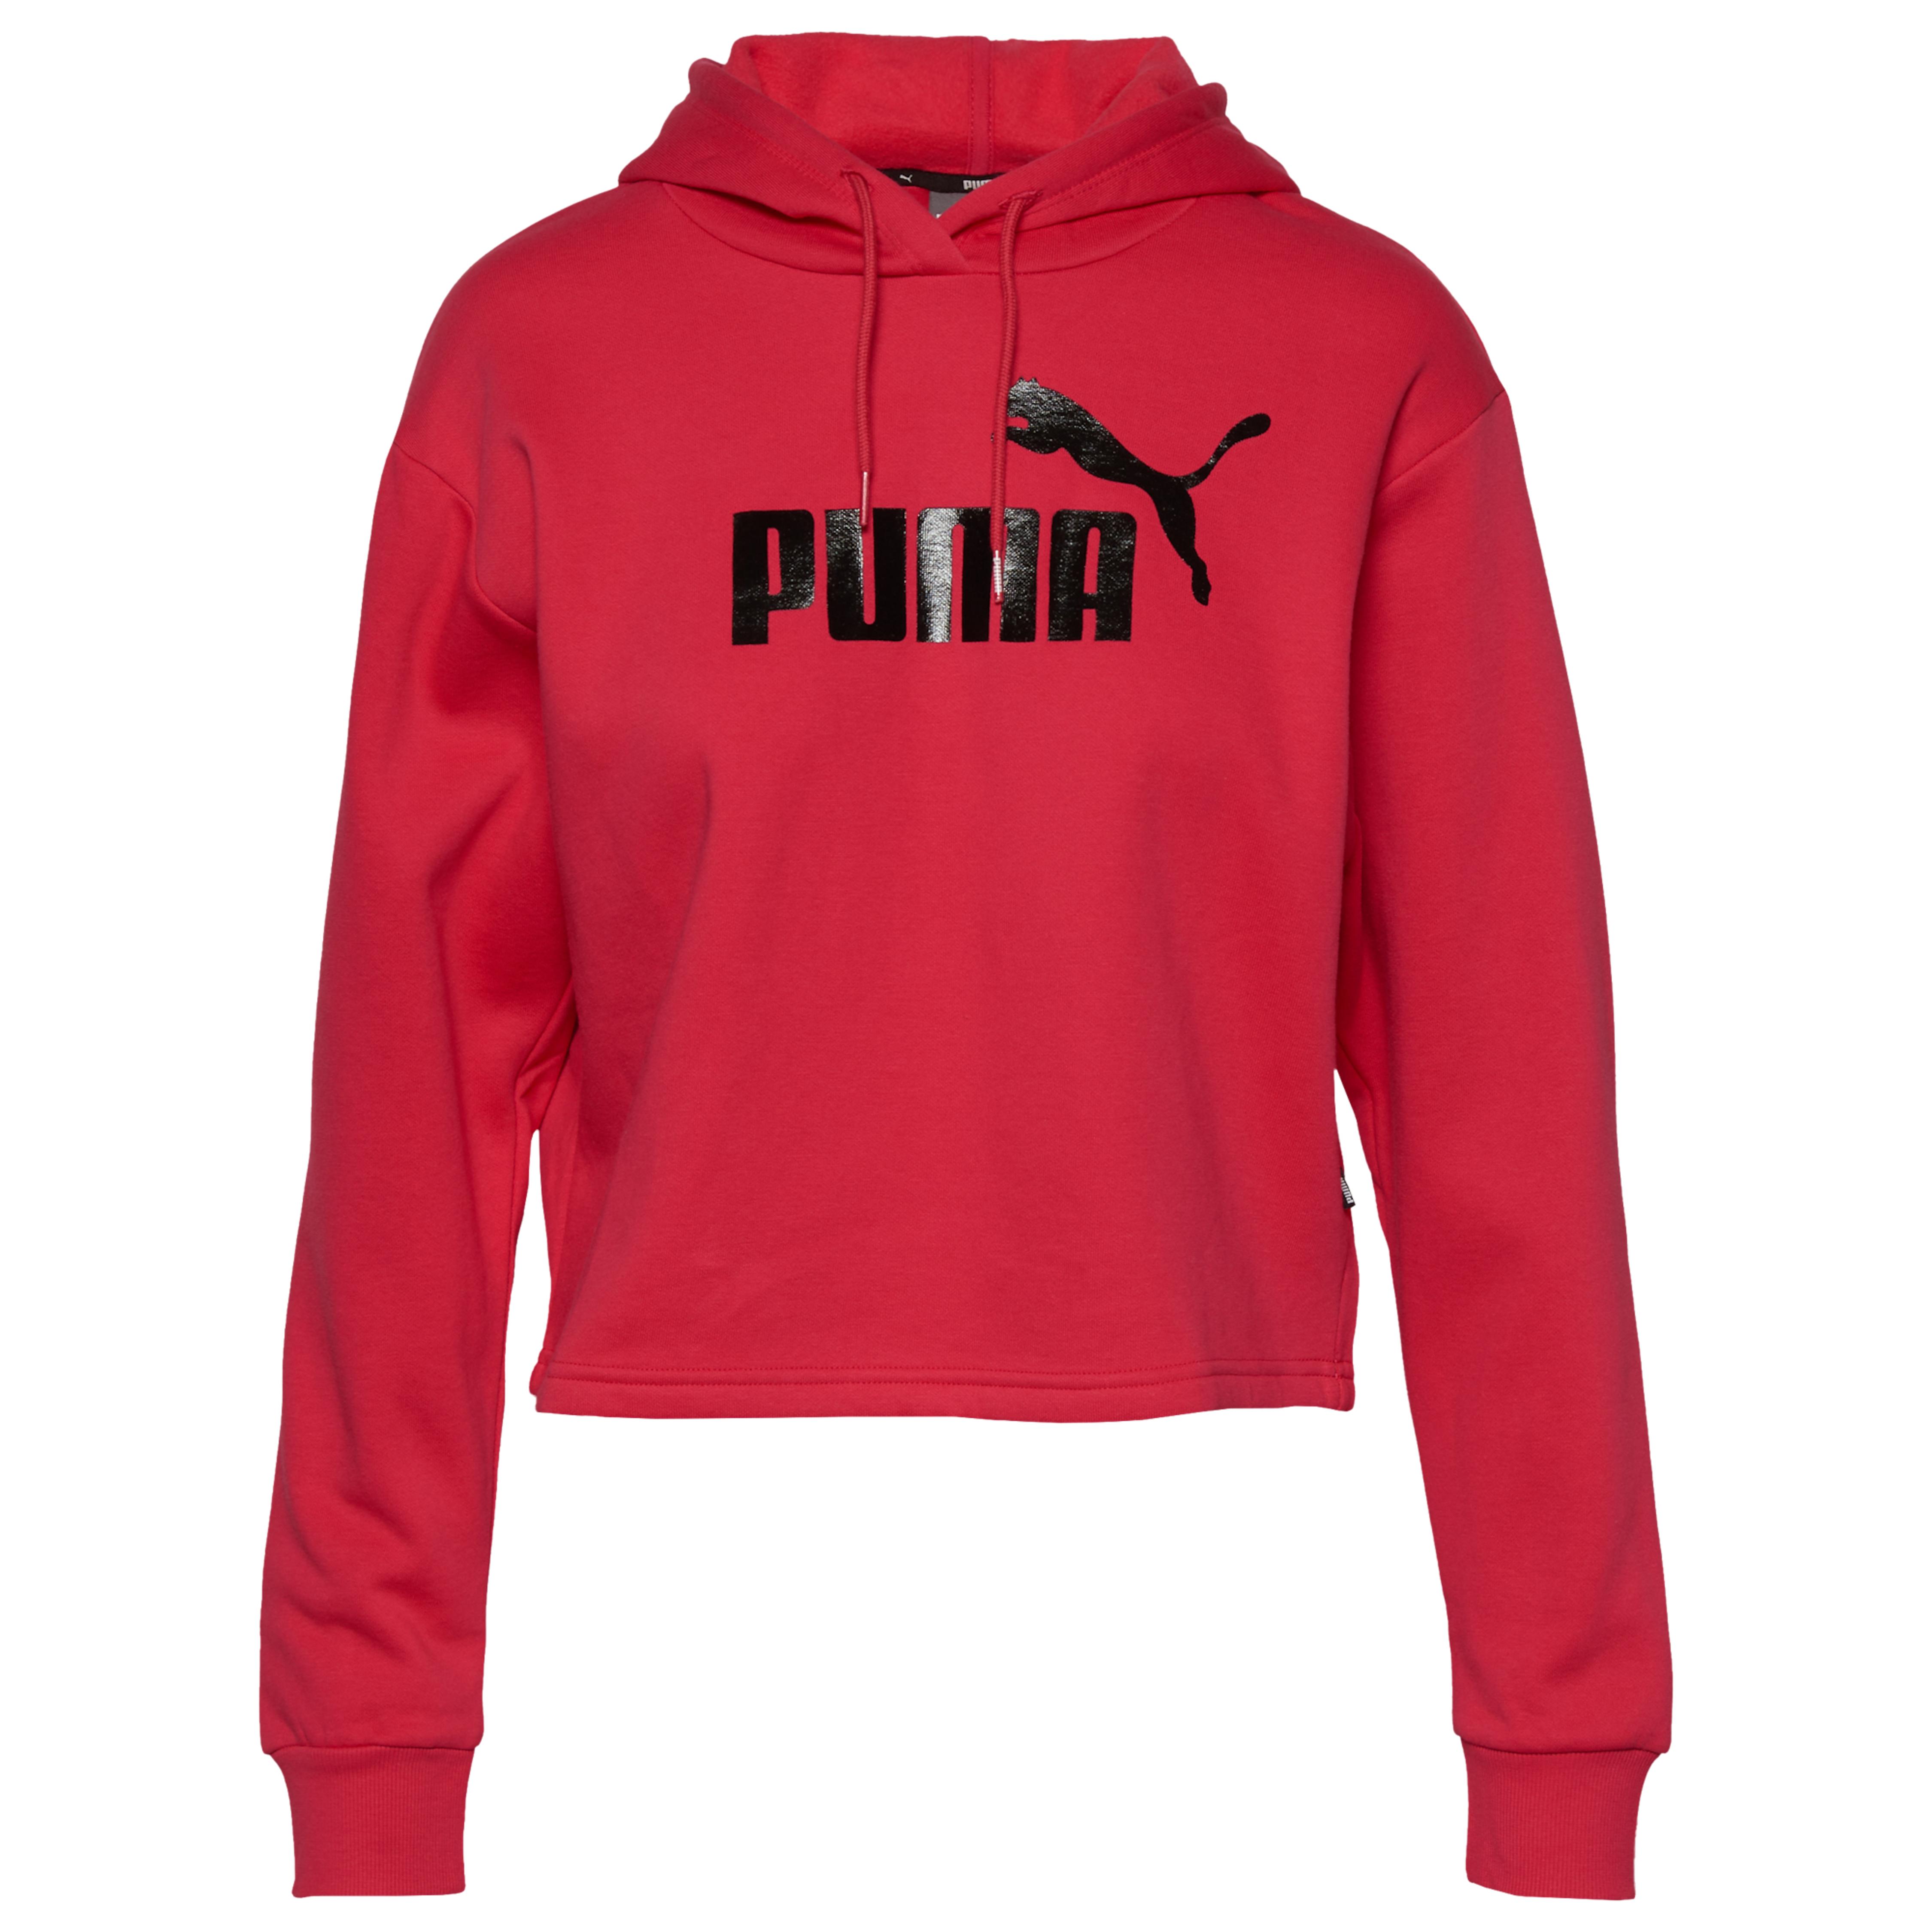 PUMA Rubber Essentials Cropped Hoodie in Rose (Red) - Save 11% - Lyst